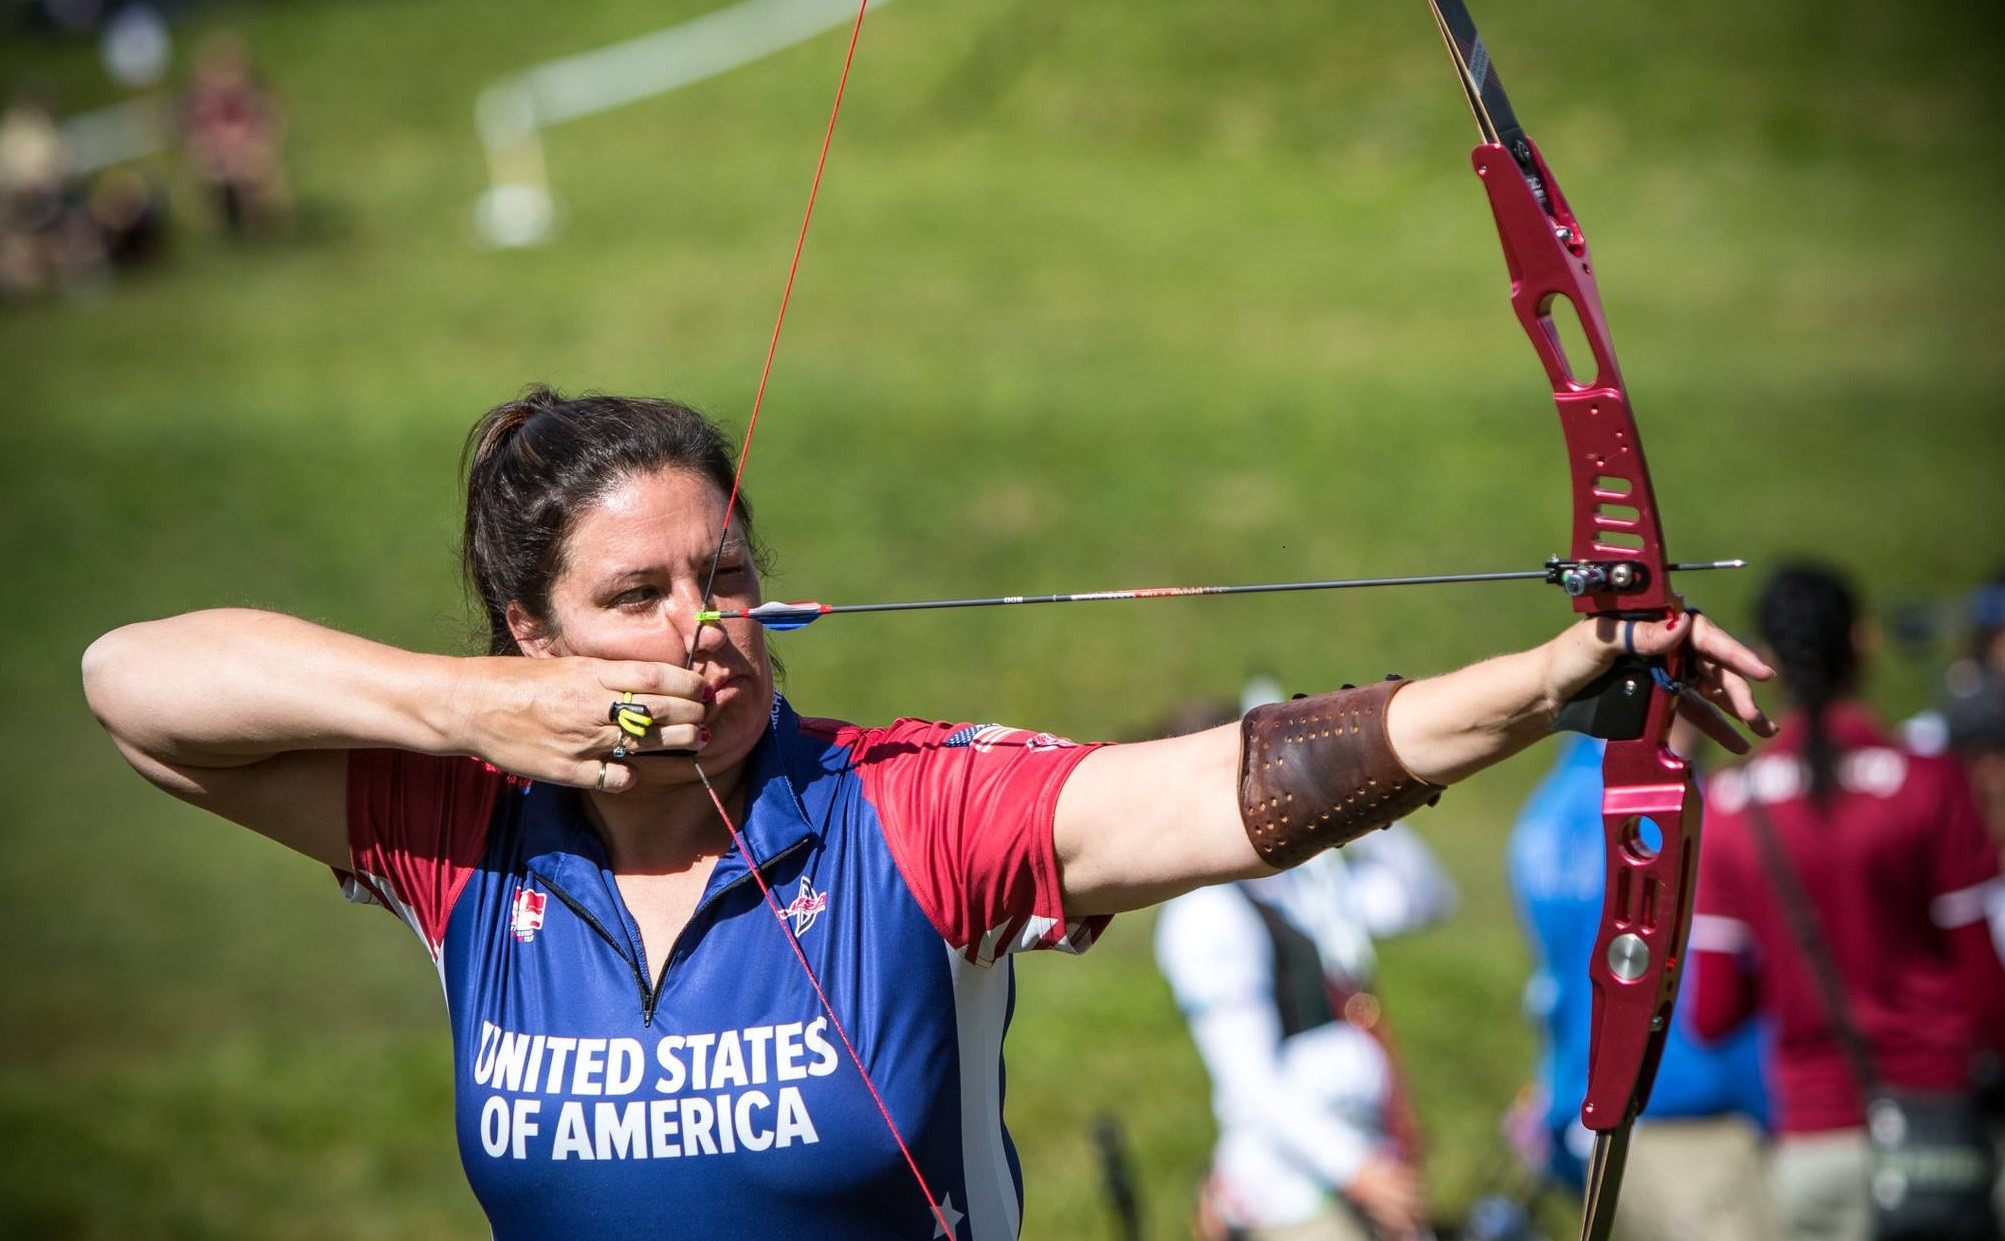 Fawn Girard topped women's barebow qualification ©World Archery